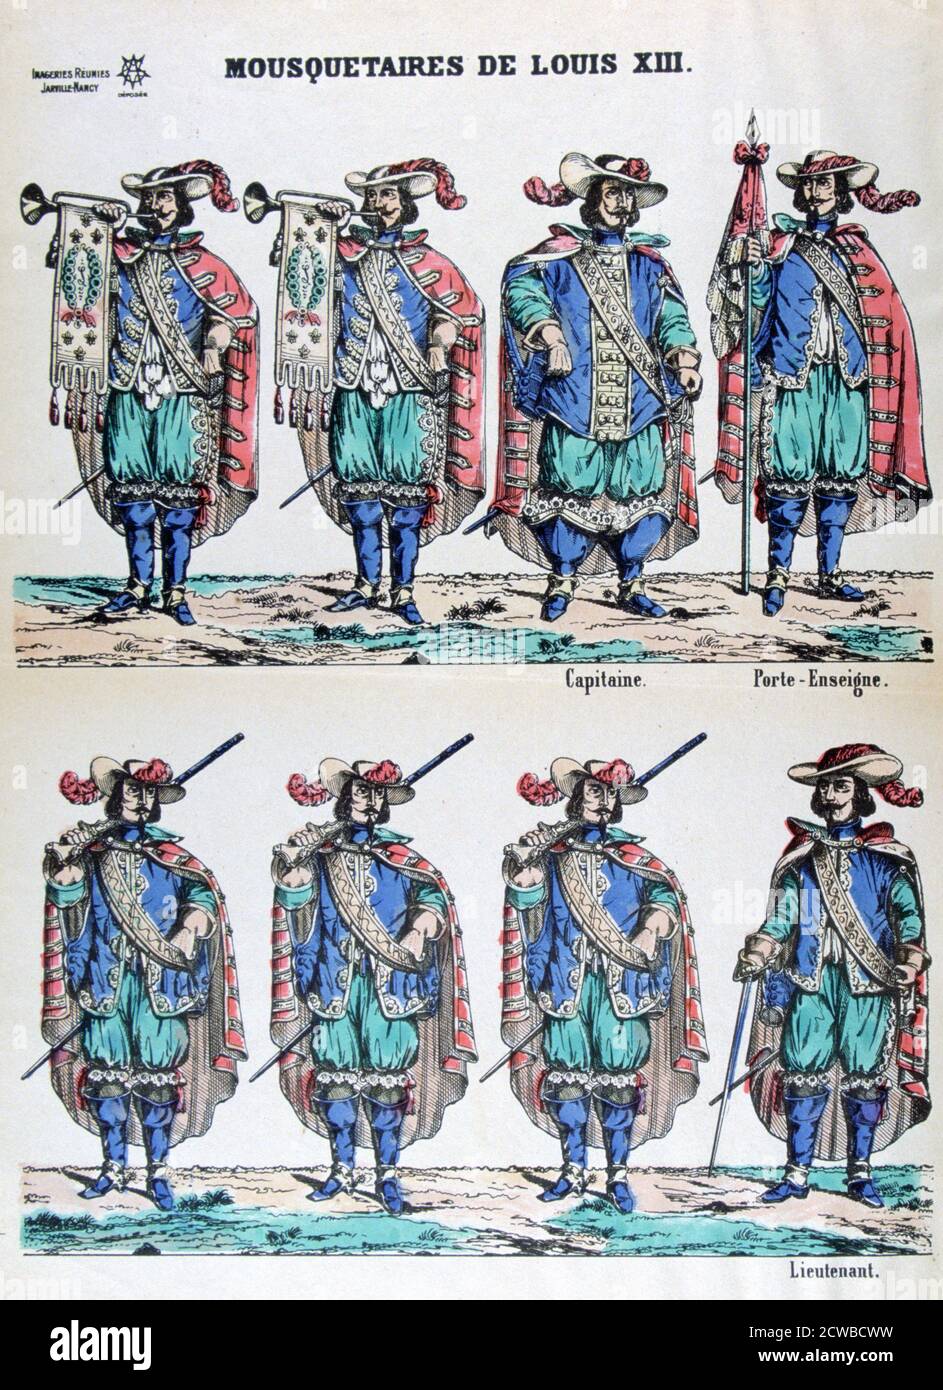 Musketeers of Louis XIII, 17th century (19th century). A print from Imageries Reunies Jarville-Nancy, 19th century. The artist is unknown. Stock Photo